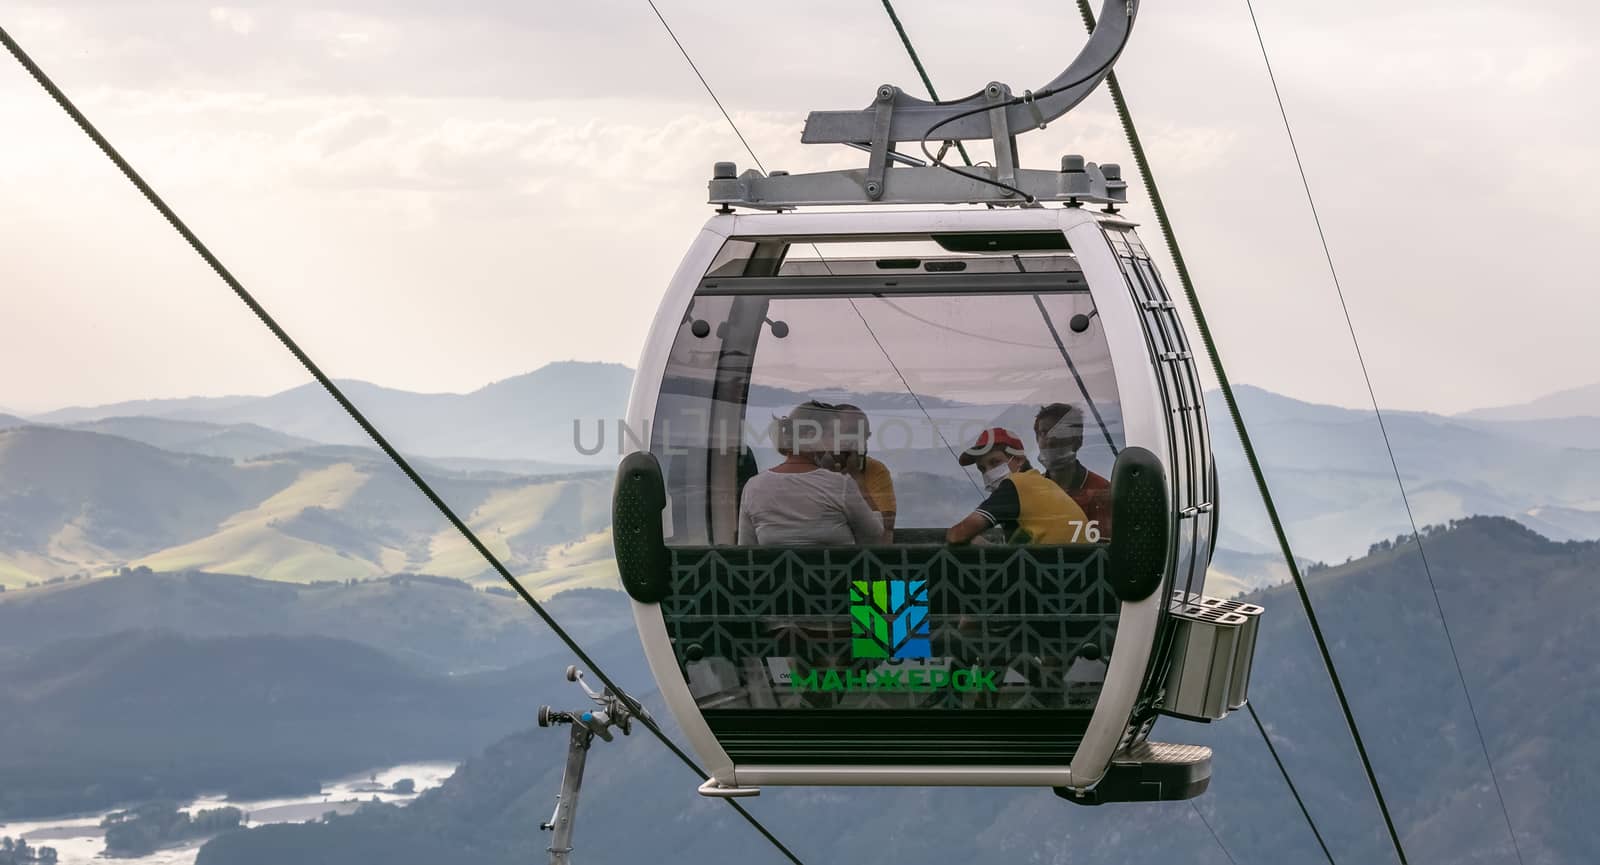 Manzherok resort, Altai Mountains, Russia - August 12, 2020: Shot of cable car with tourists inside of it wearing masks. Cloudy sky background. New Covid 19 reality concept.